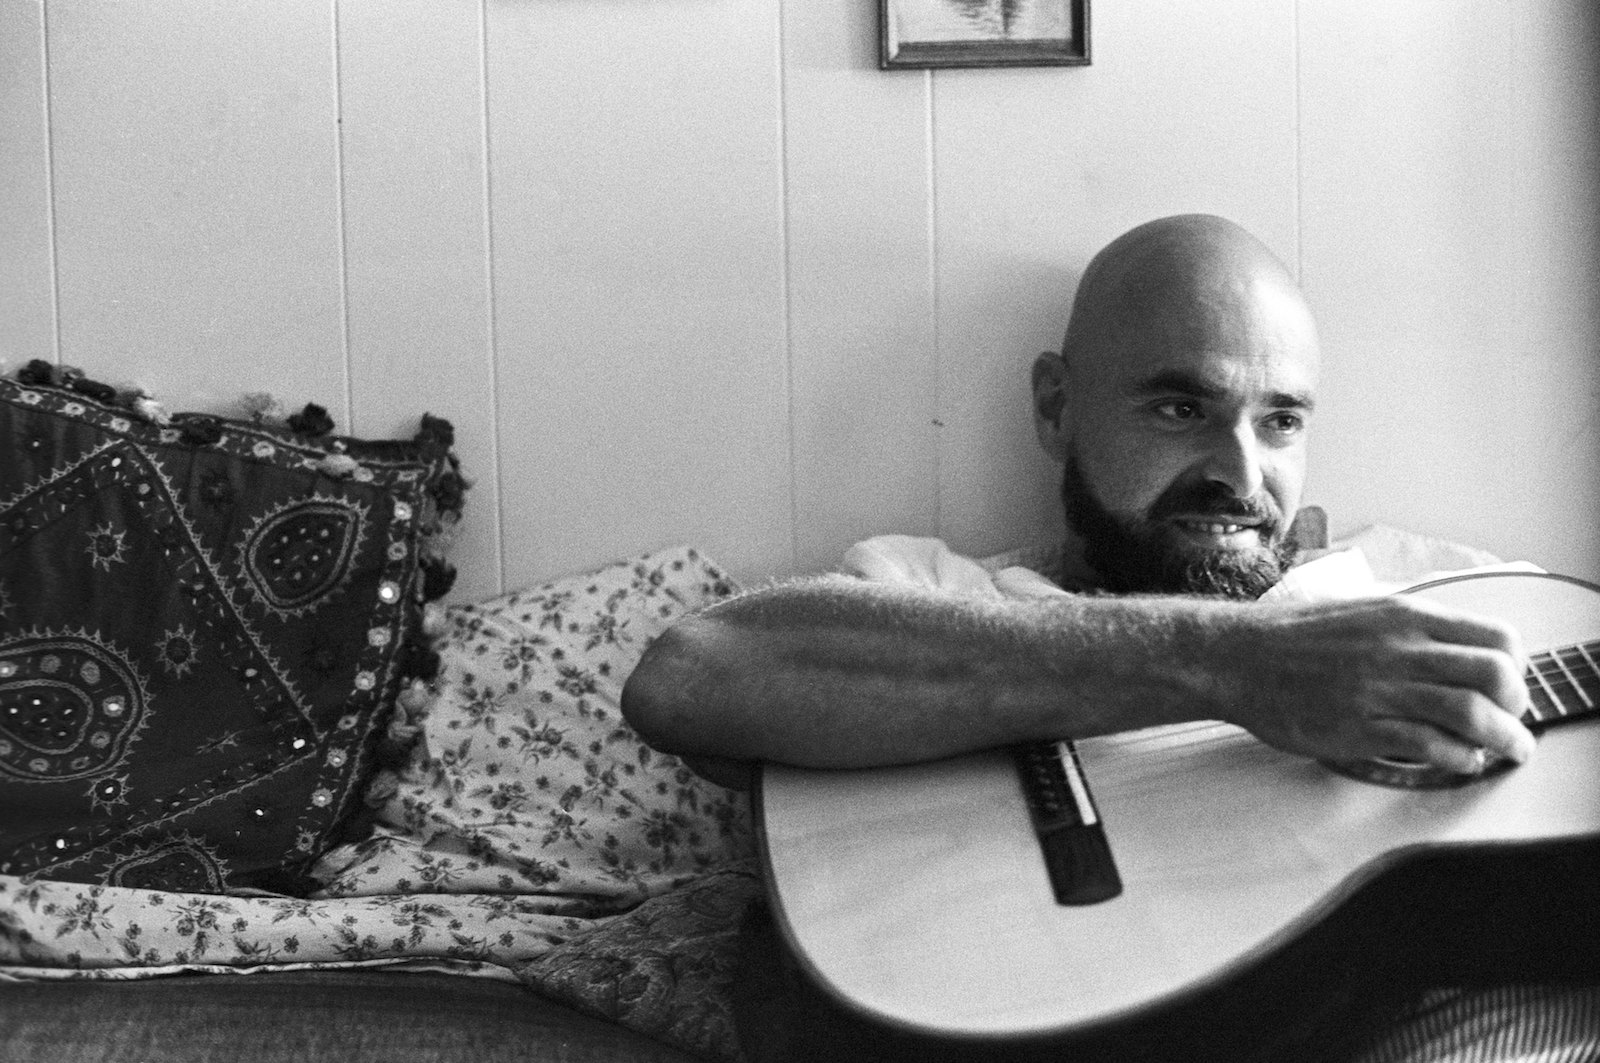 a black and white image of shel silverstein, who is a bald man with a beard holding a guitar